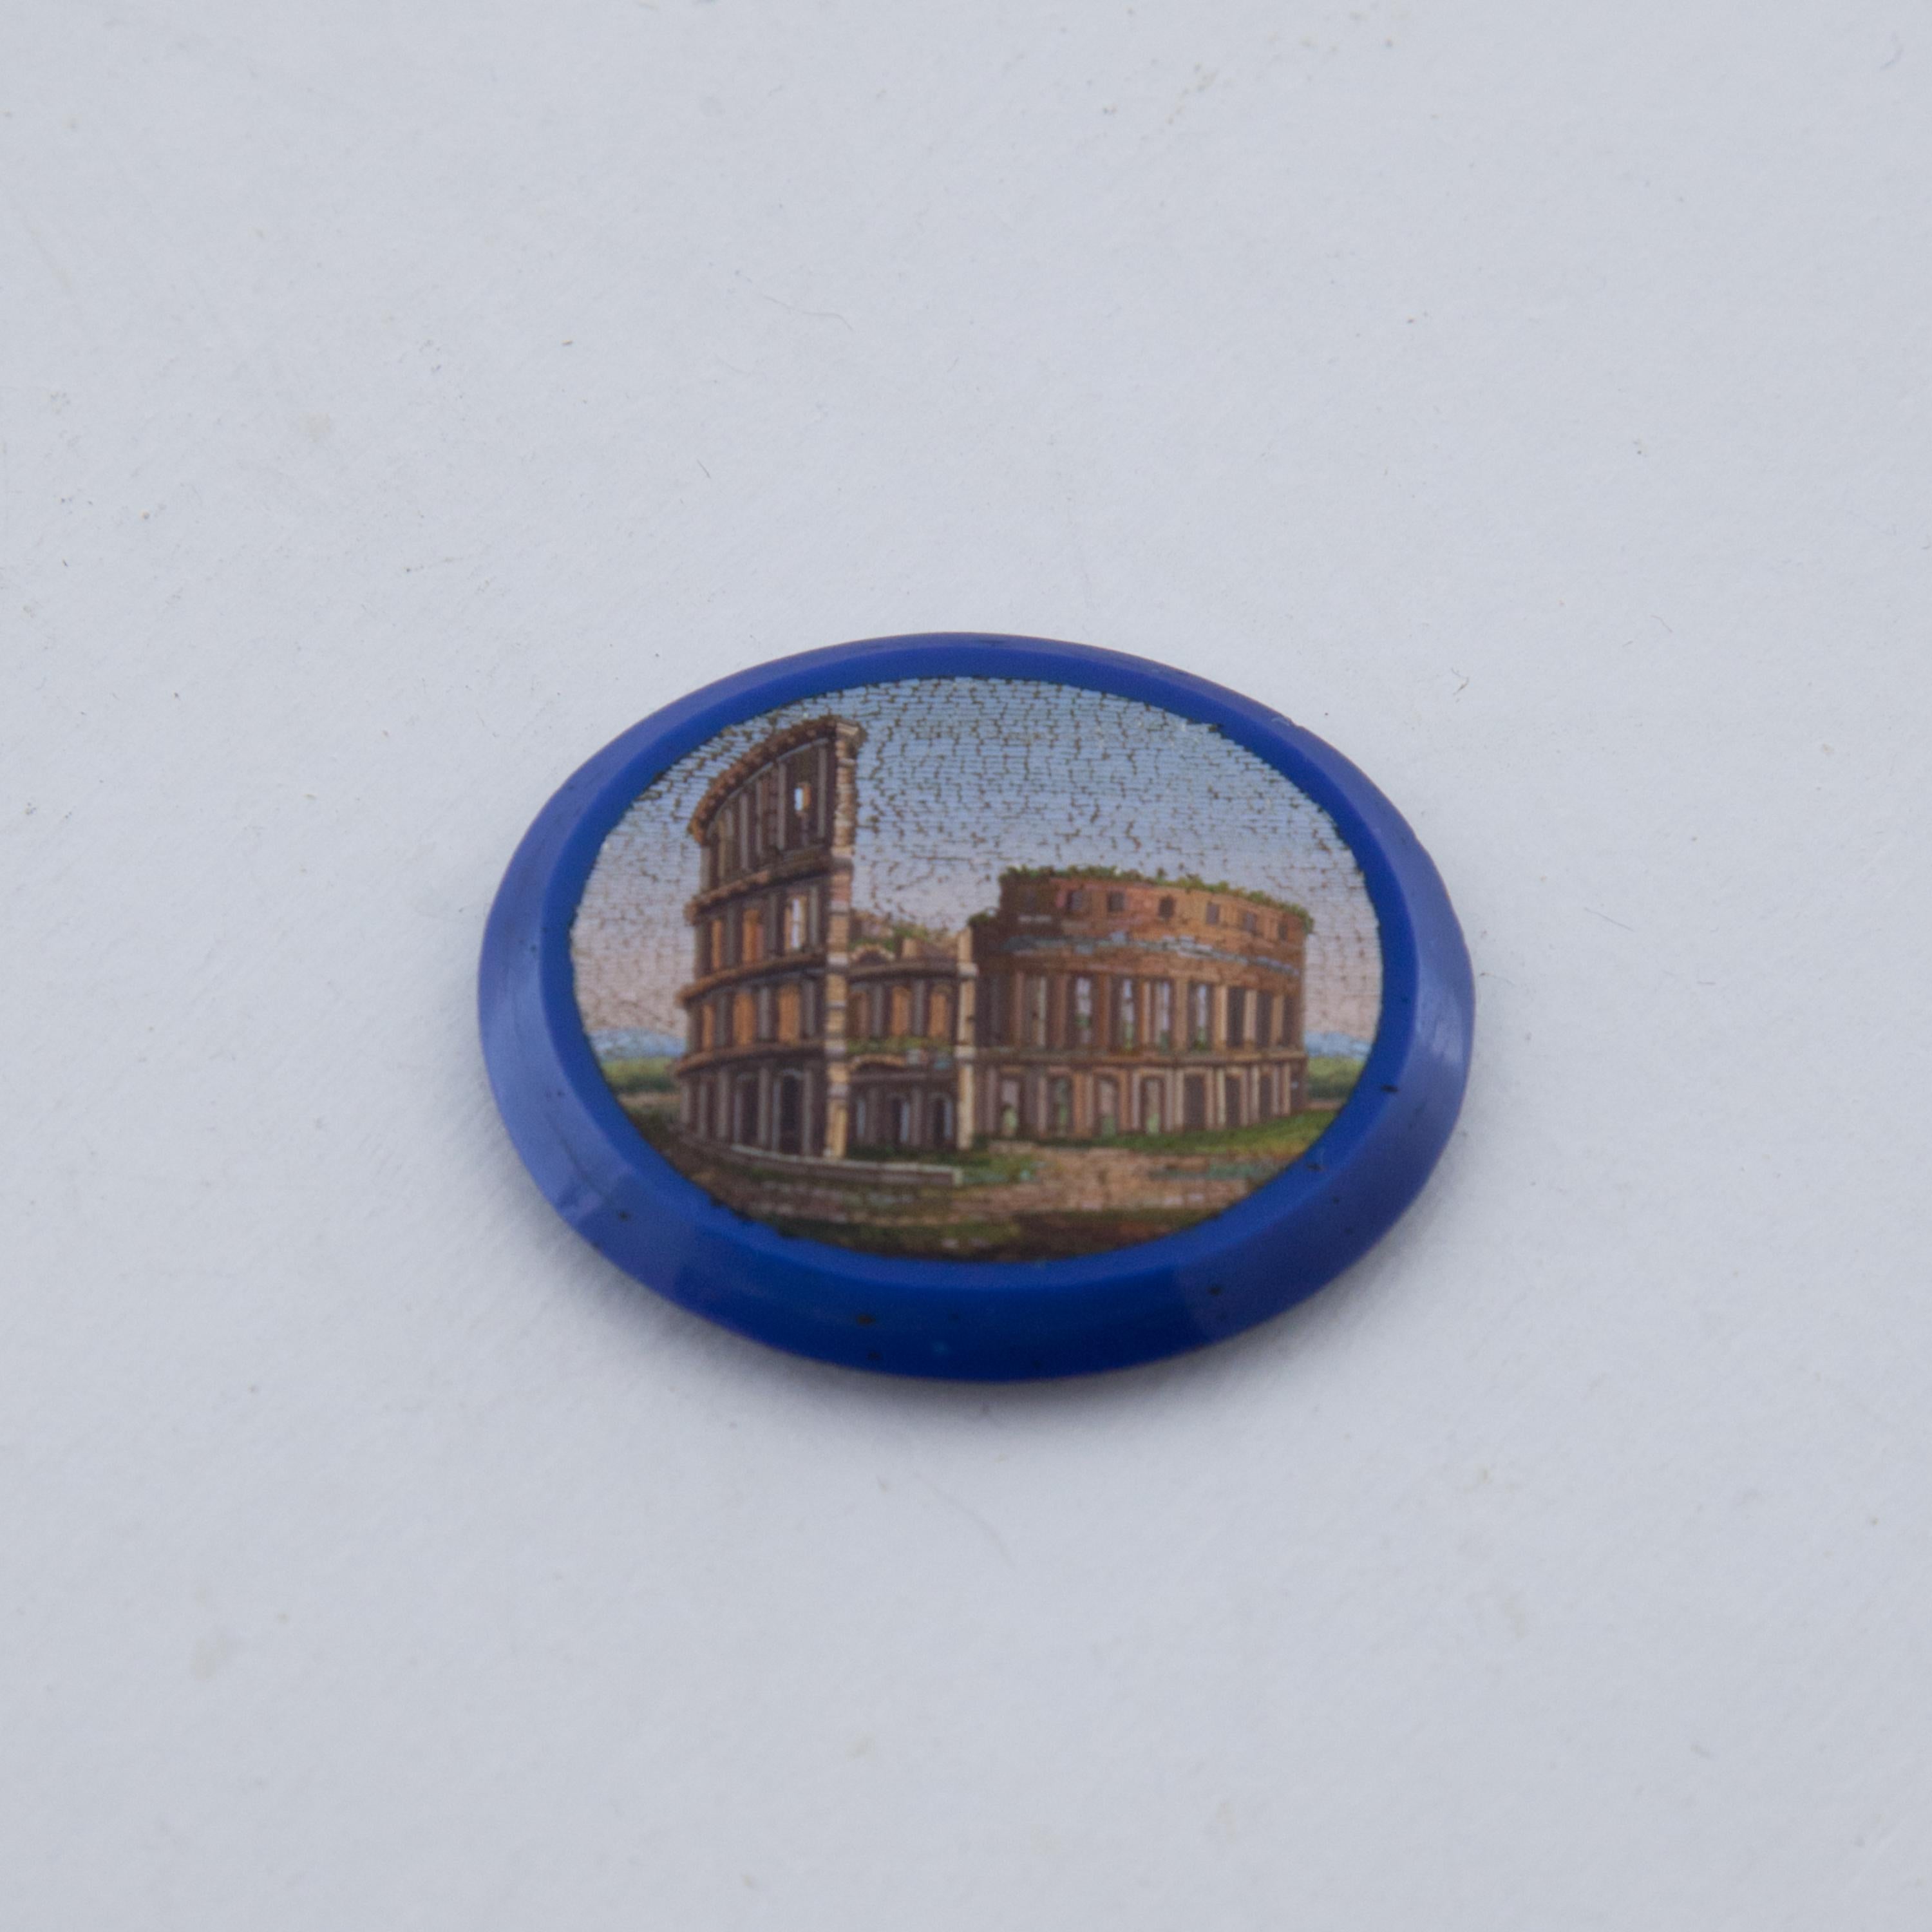 Double-sided, very finely worked with views of the Pantheon and the Colosseum in an oval setting.